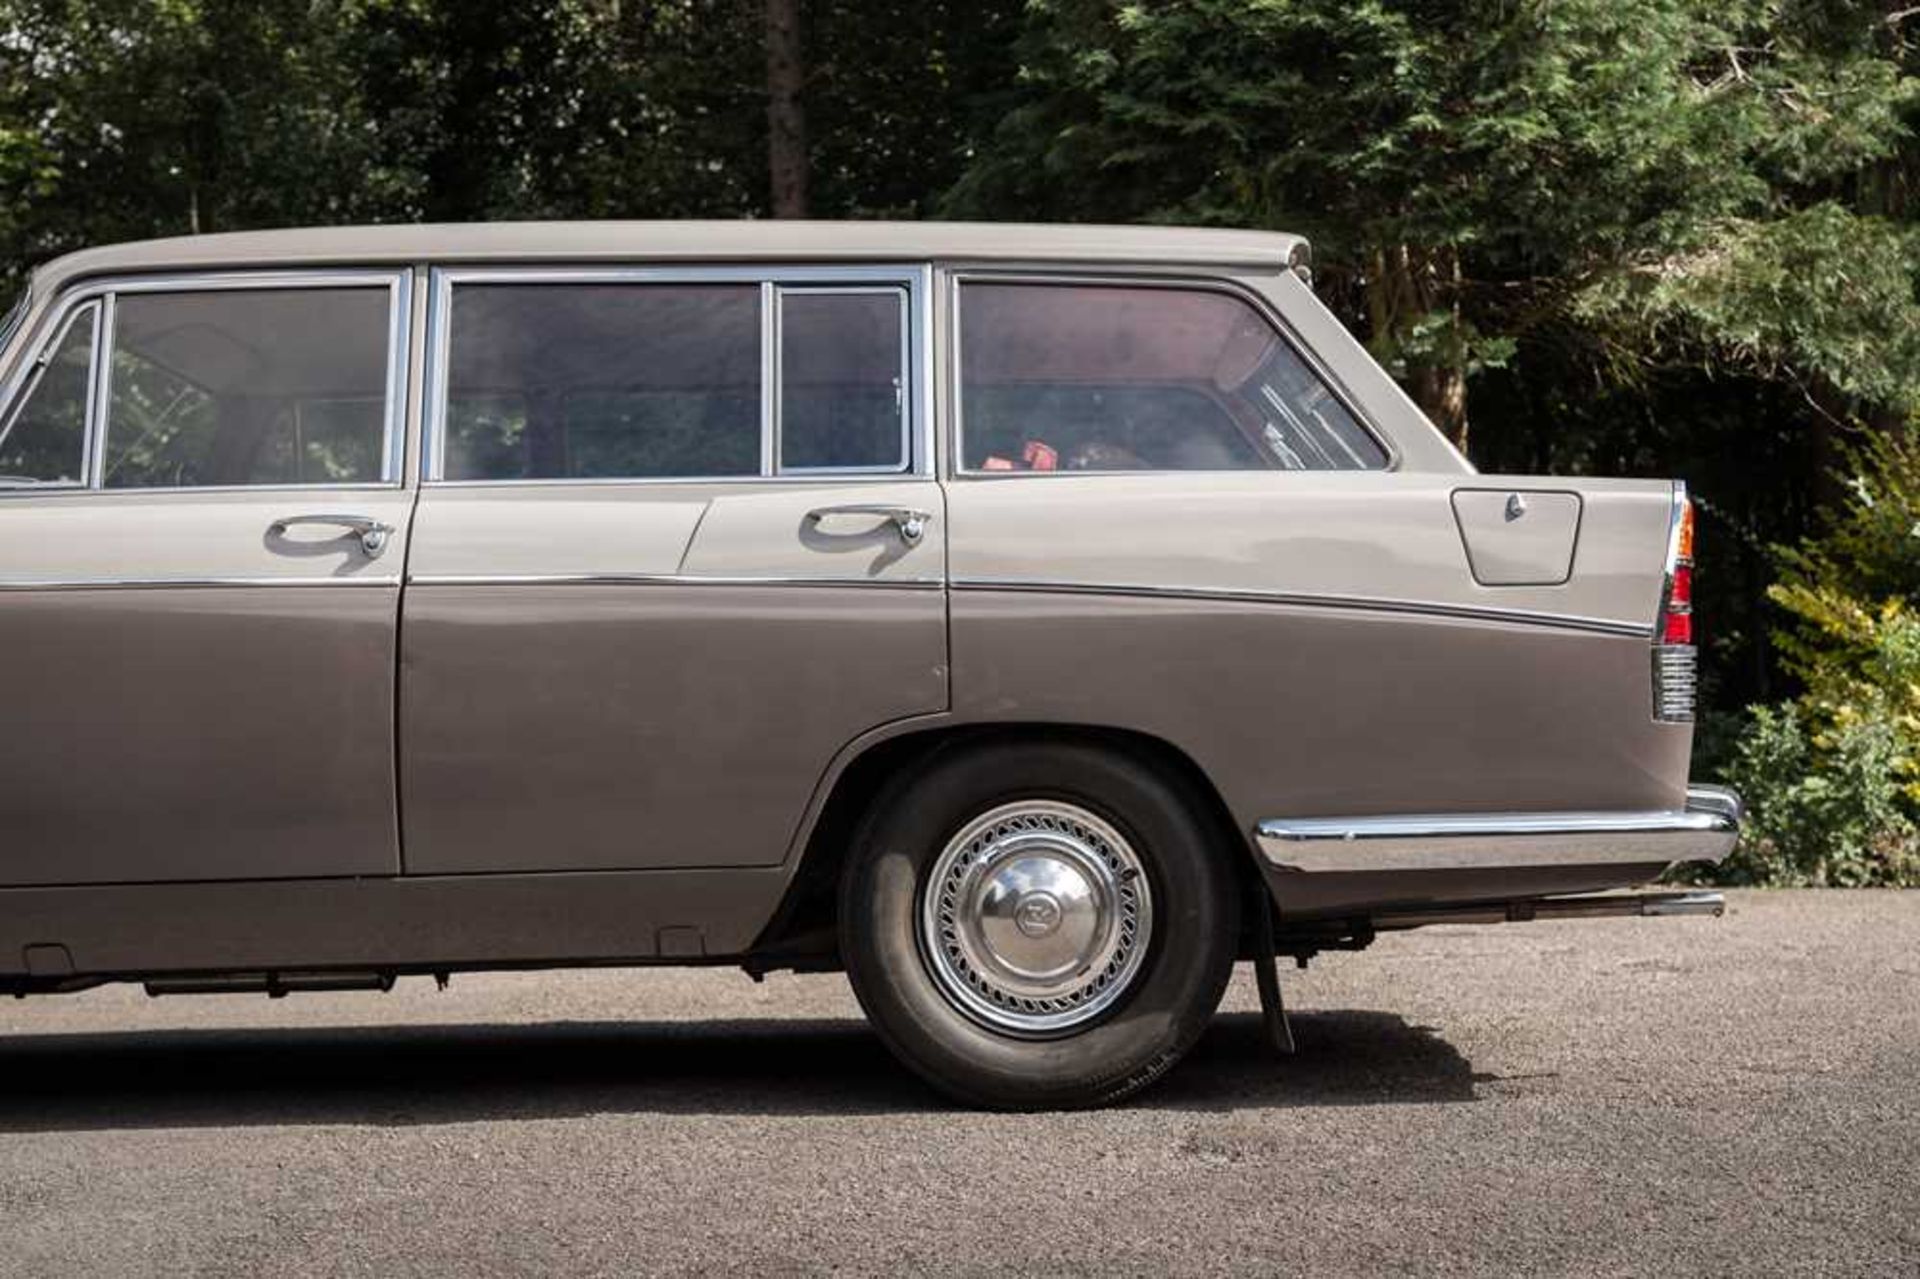 1964 Morris Oxford Series VI Farina Traveller Just 7,000 miles from new - Image 39 of 98